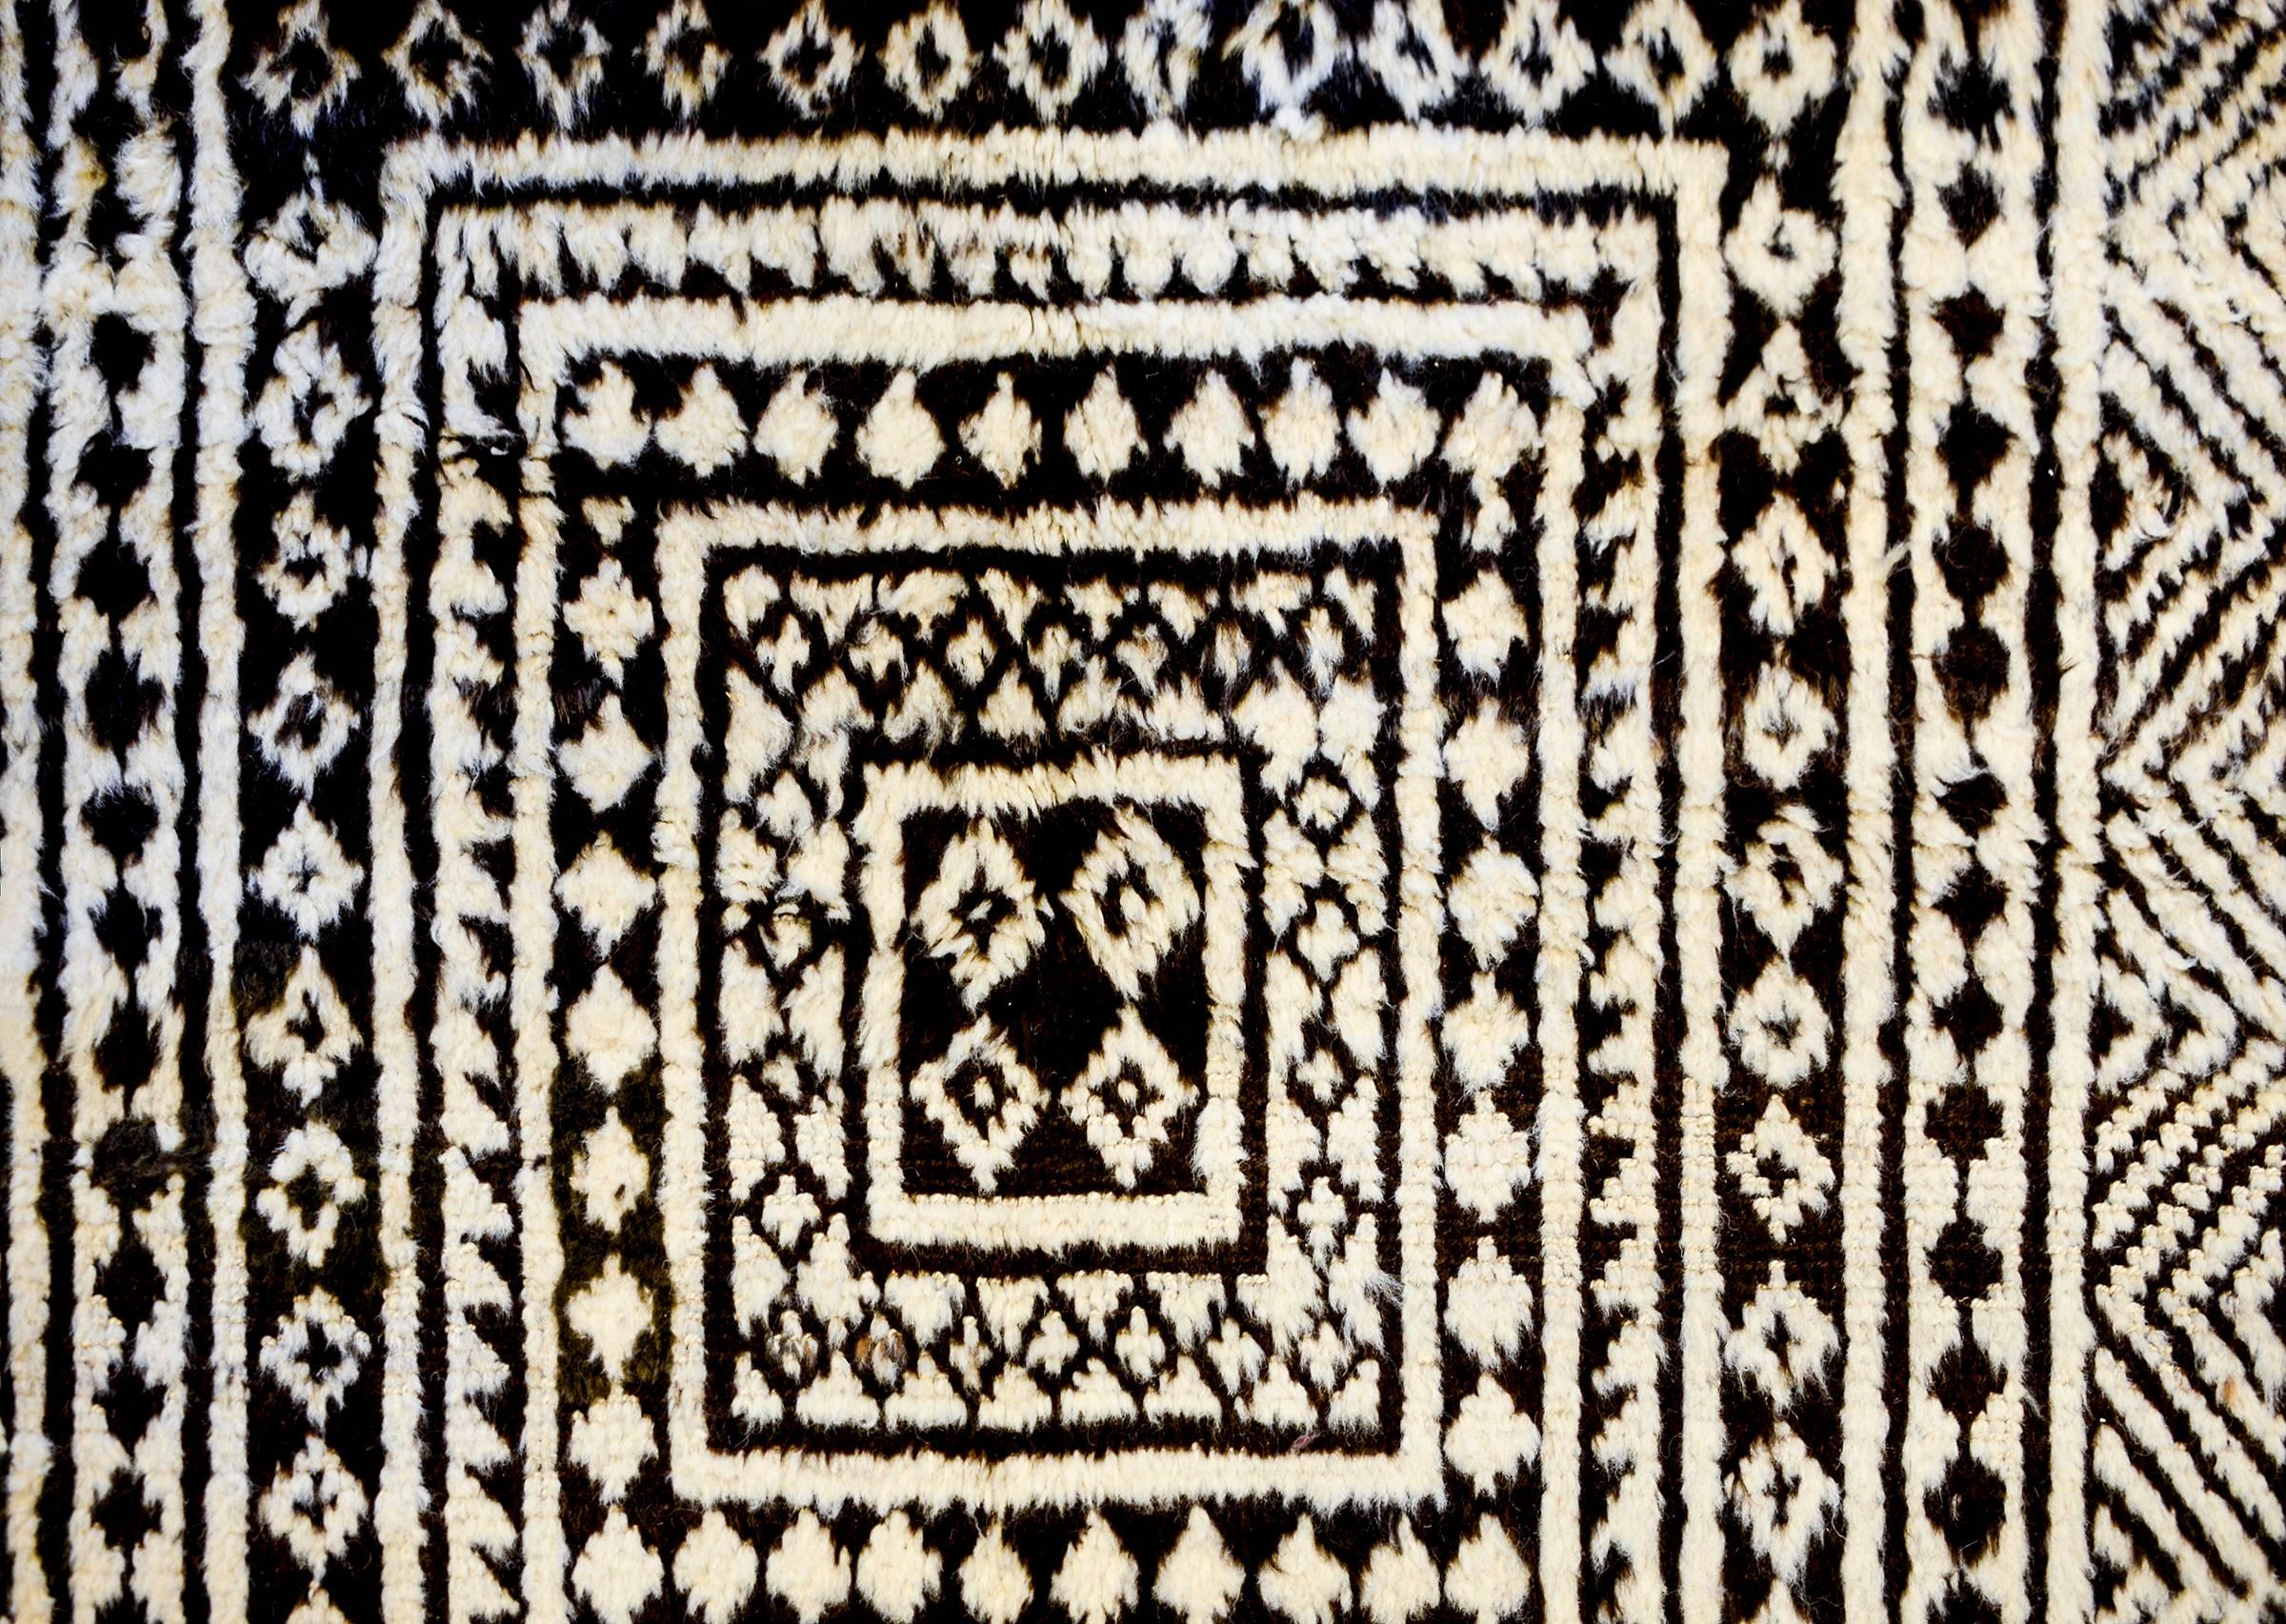 An incredible 19th century Persian Gabbeh rug with an amazing geometric pattern with diamonds, square, zigzags and chevron stripes, all woven in natural undyed wool.